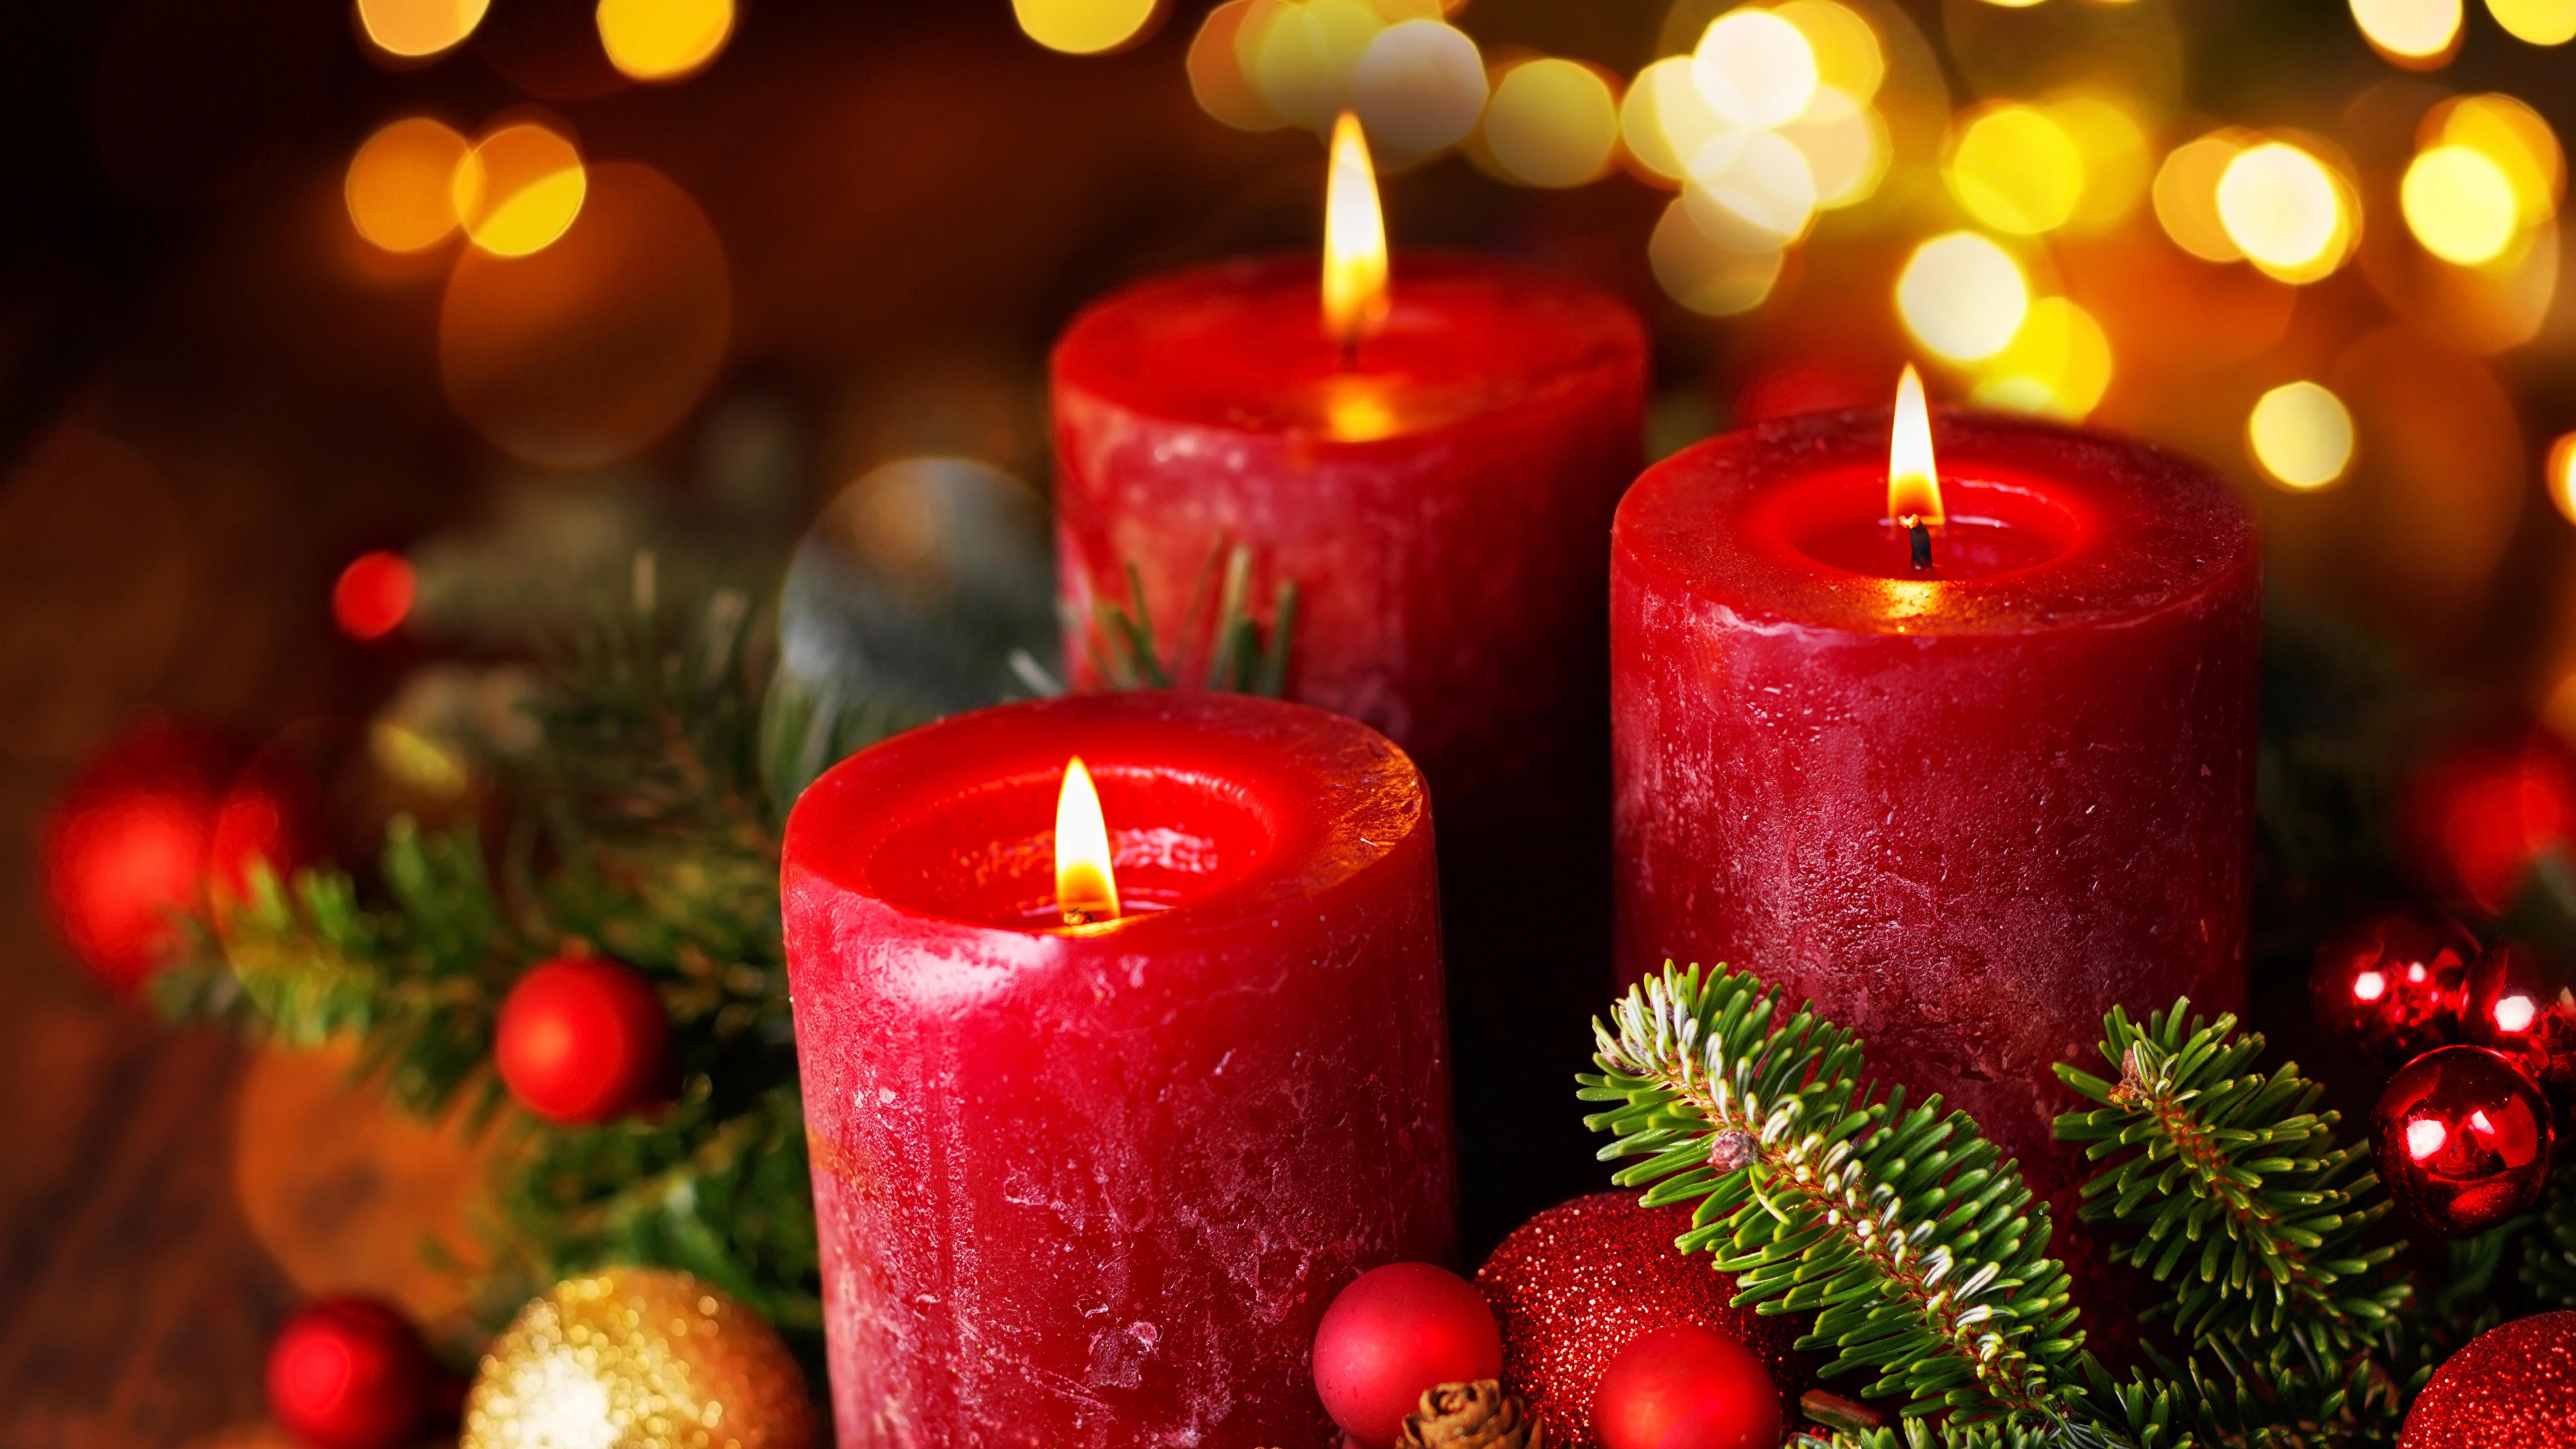 Wallpaper New year flame Candles Three 3 3840x2160